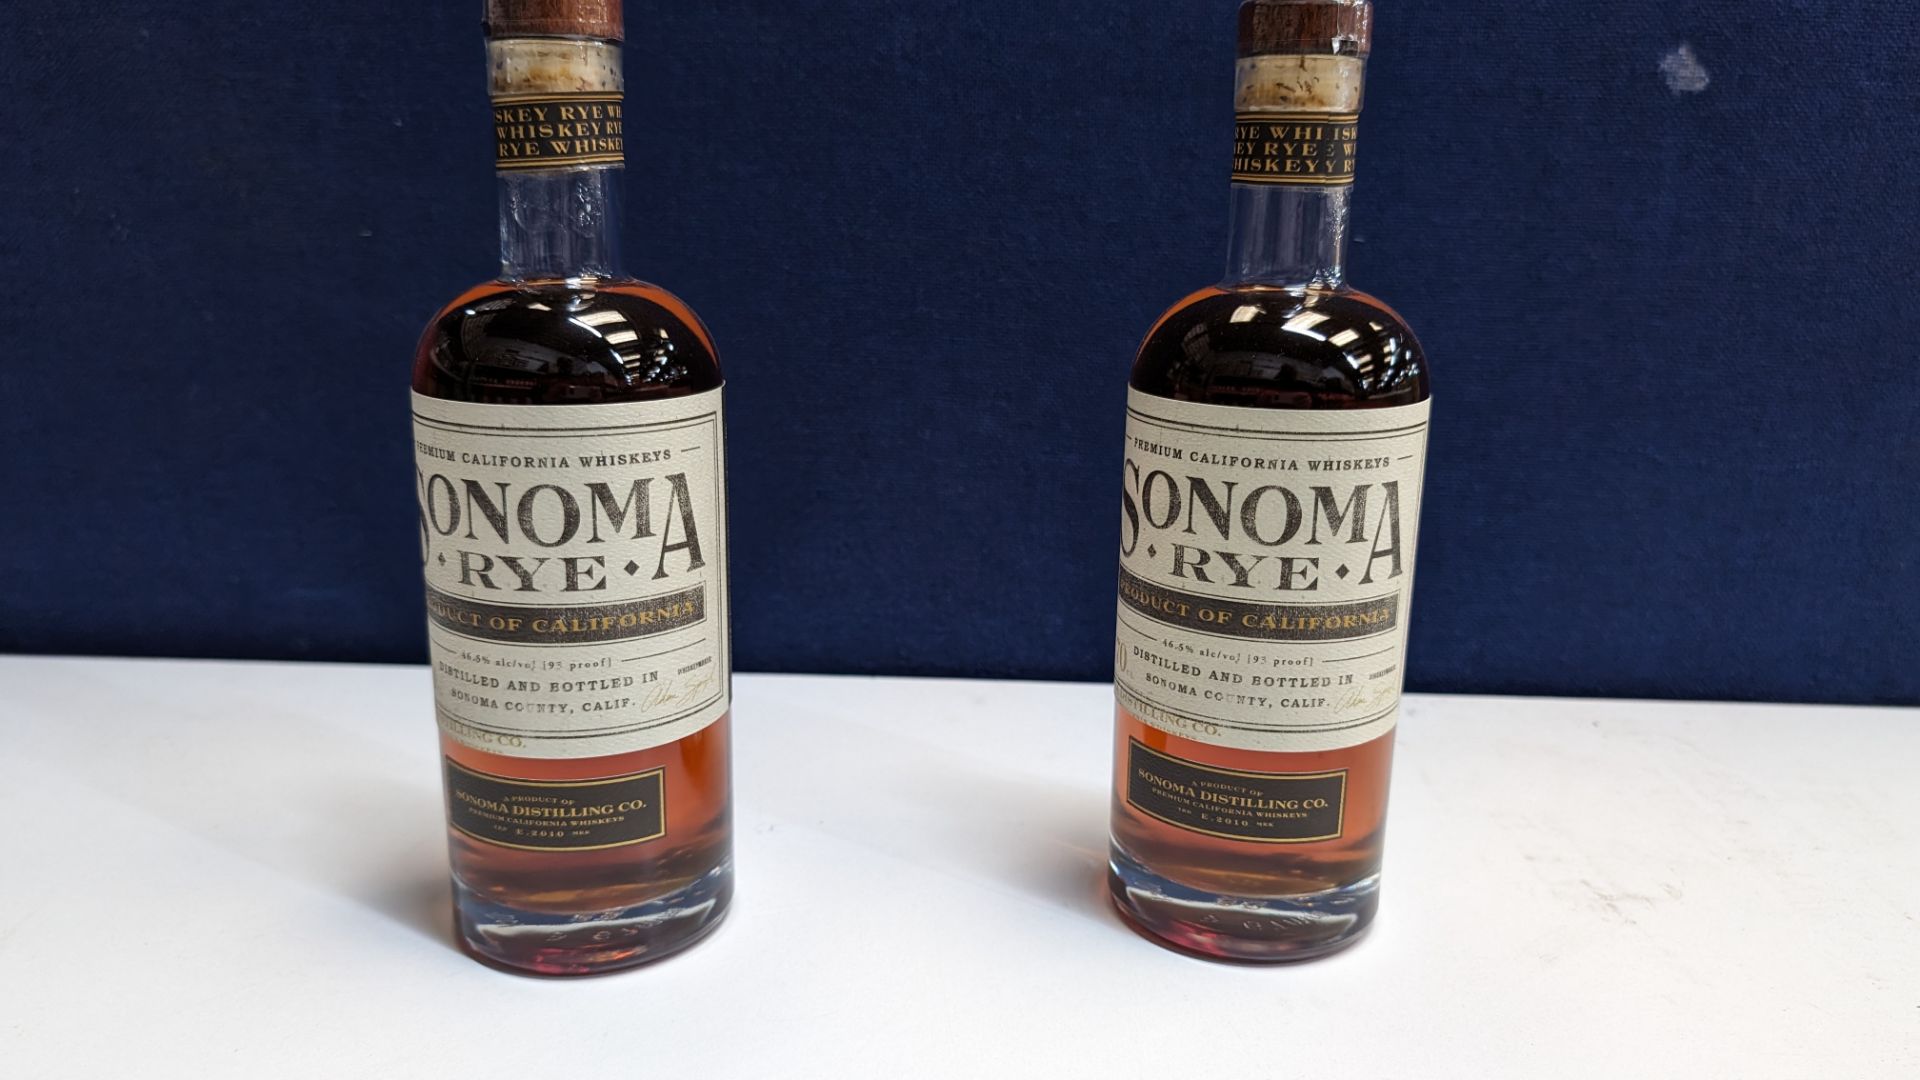 2 off 700ml bottles of Sonoma Rye Whiskey. 46.5% alc/vol (93 proof). Distilled and bottled in Sono - Image 2 of 7